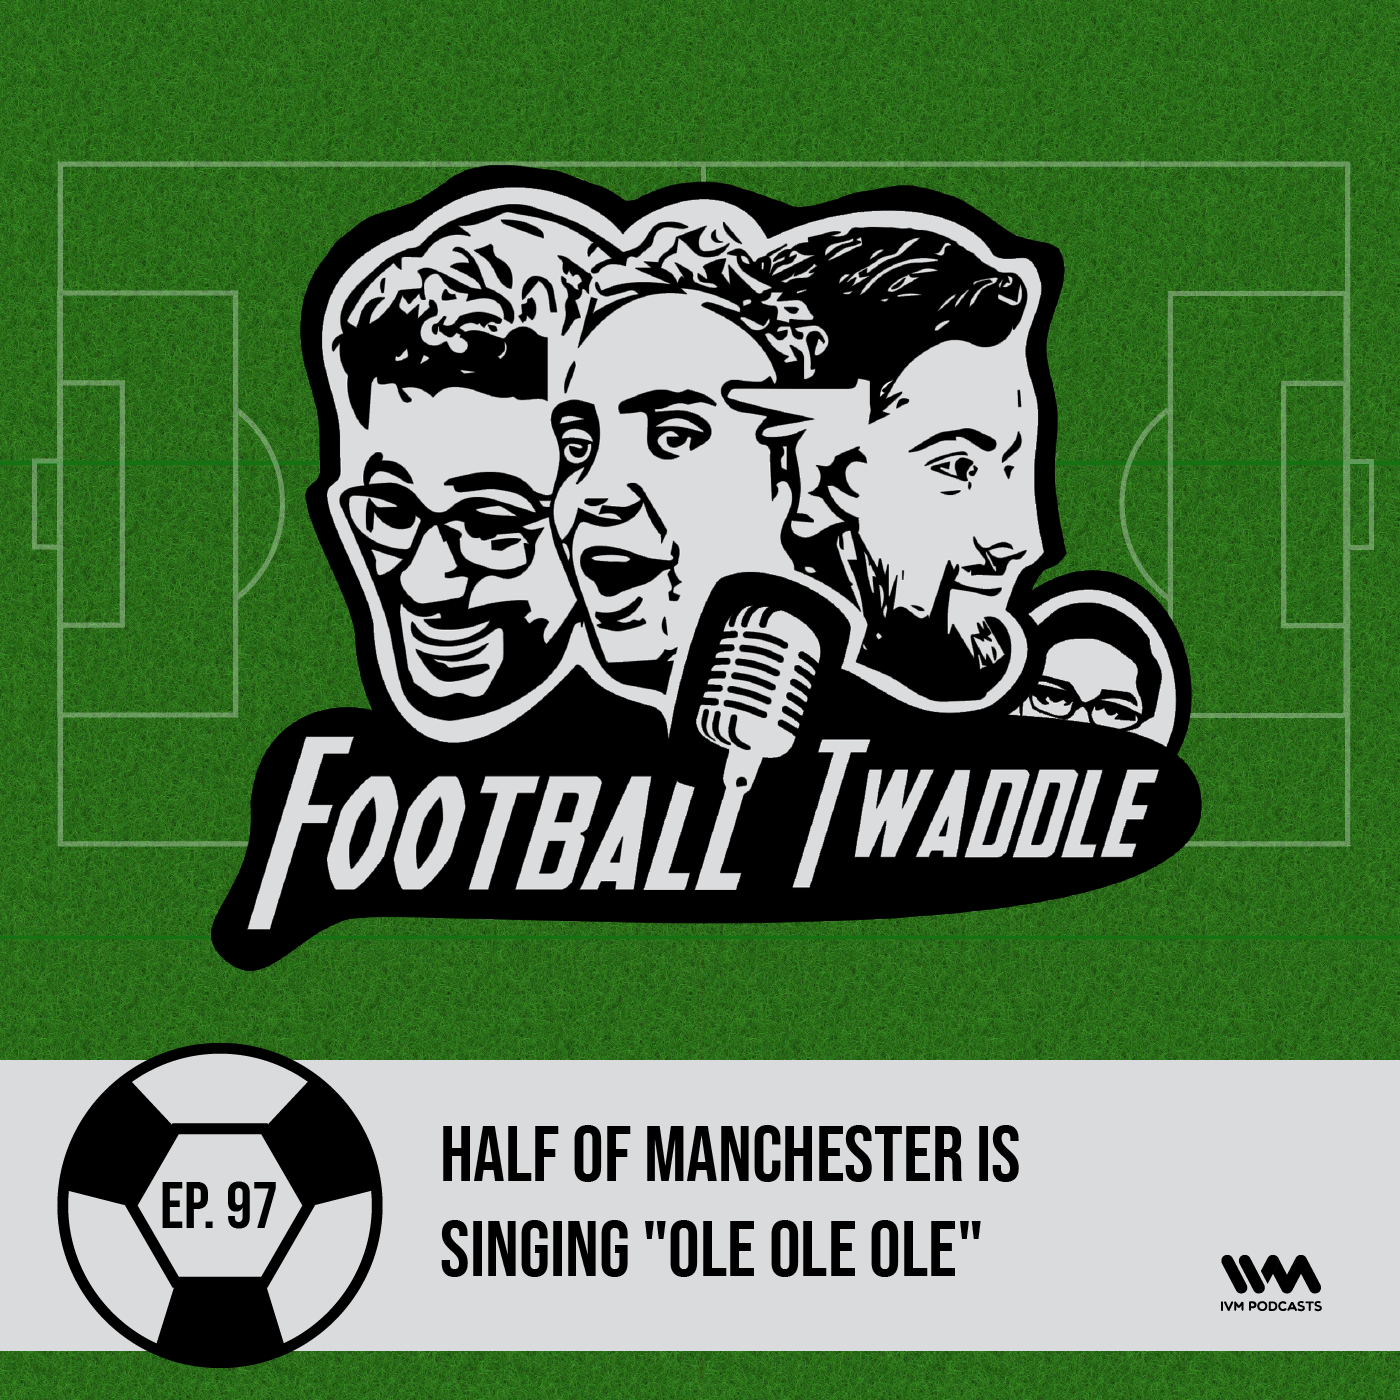 Half of Manchester is singing 